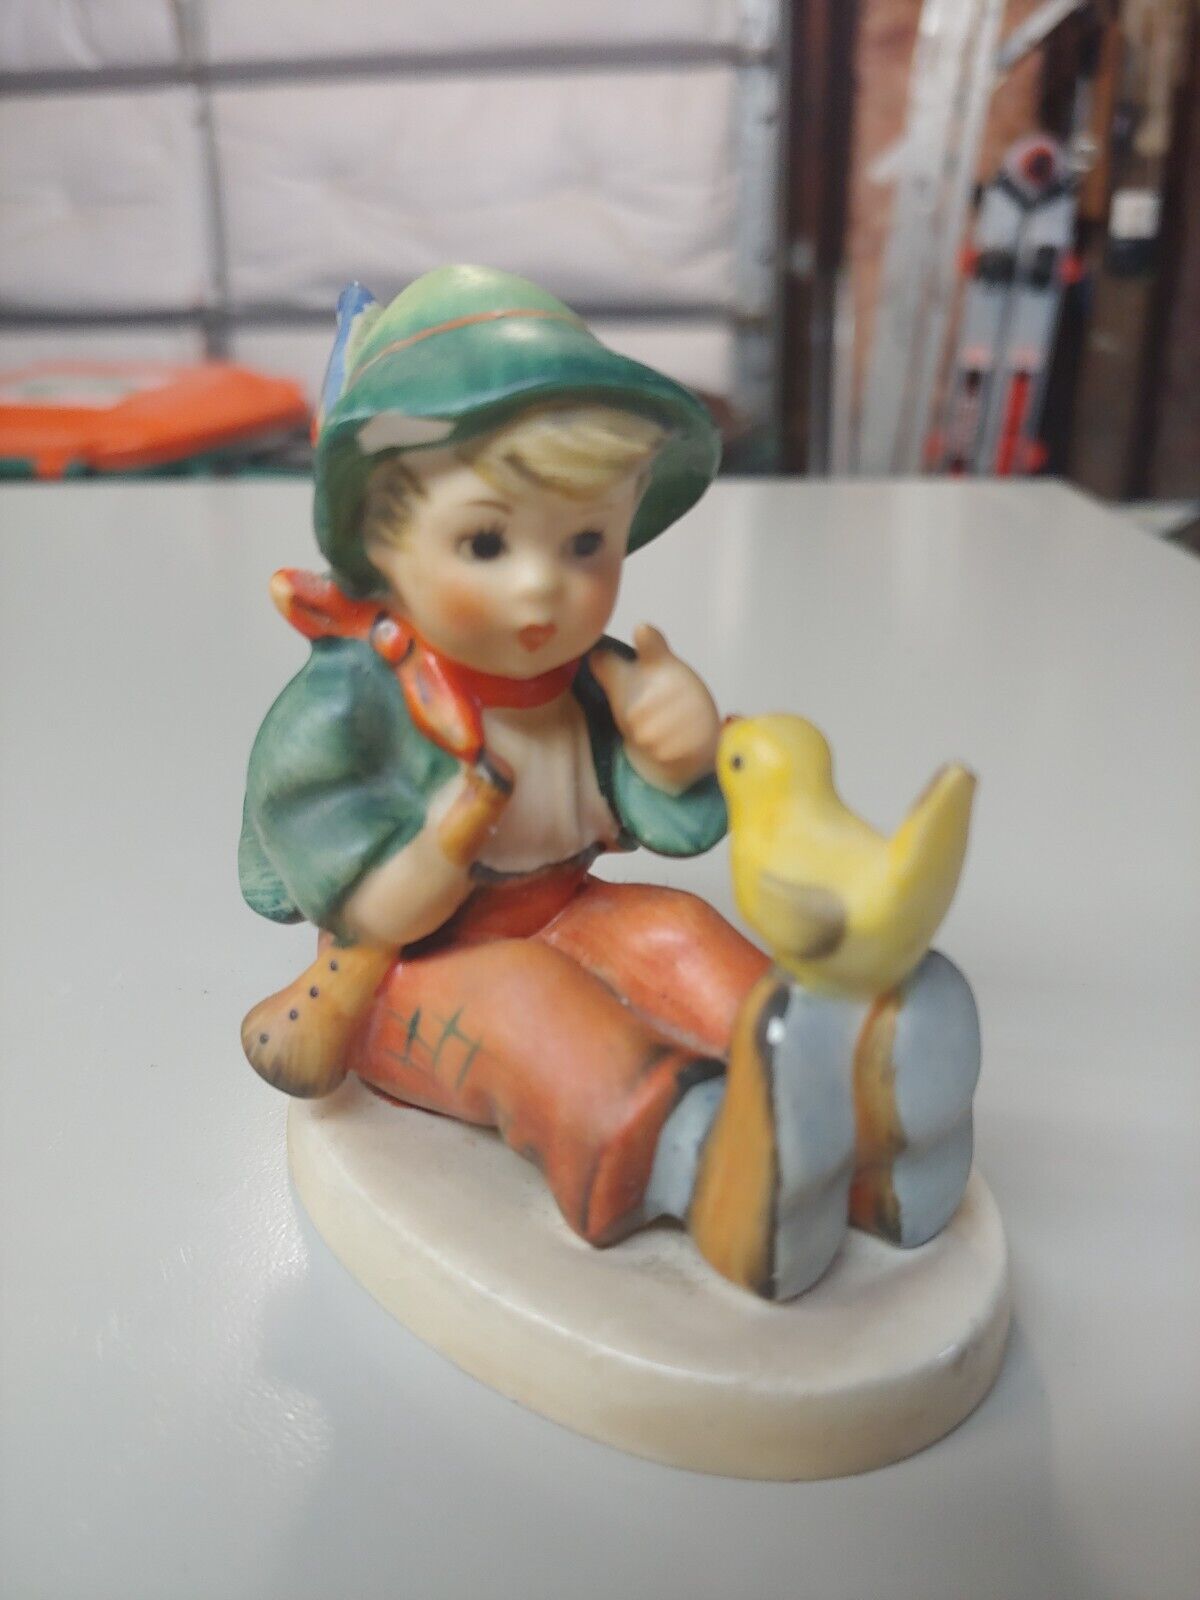 HUMMEL Figurine "Singing Lesson" #63, Boy with Yellow Bird on his foot